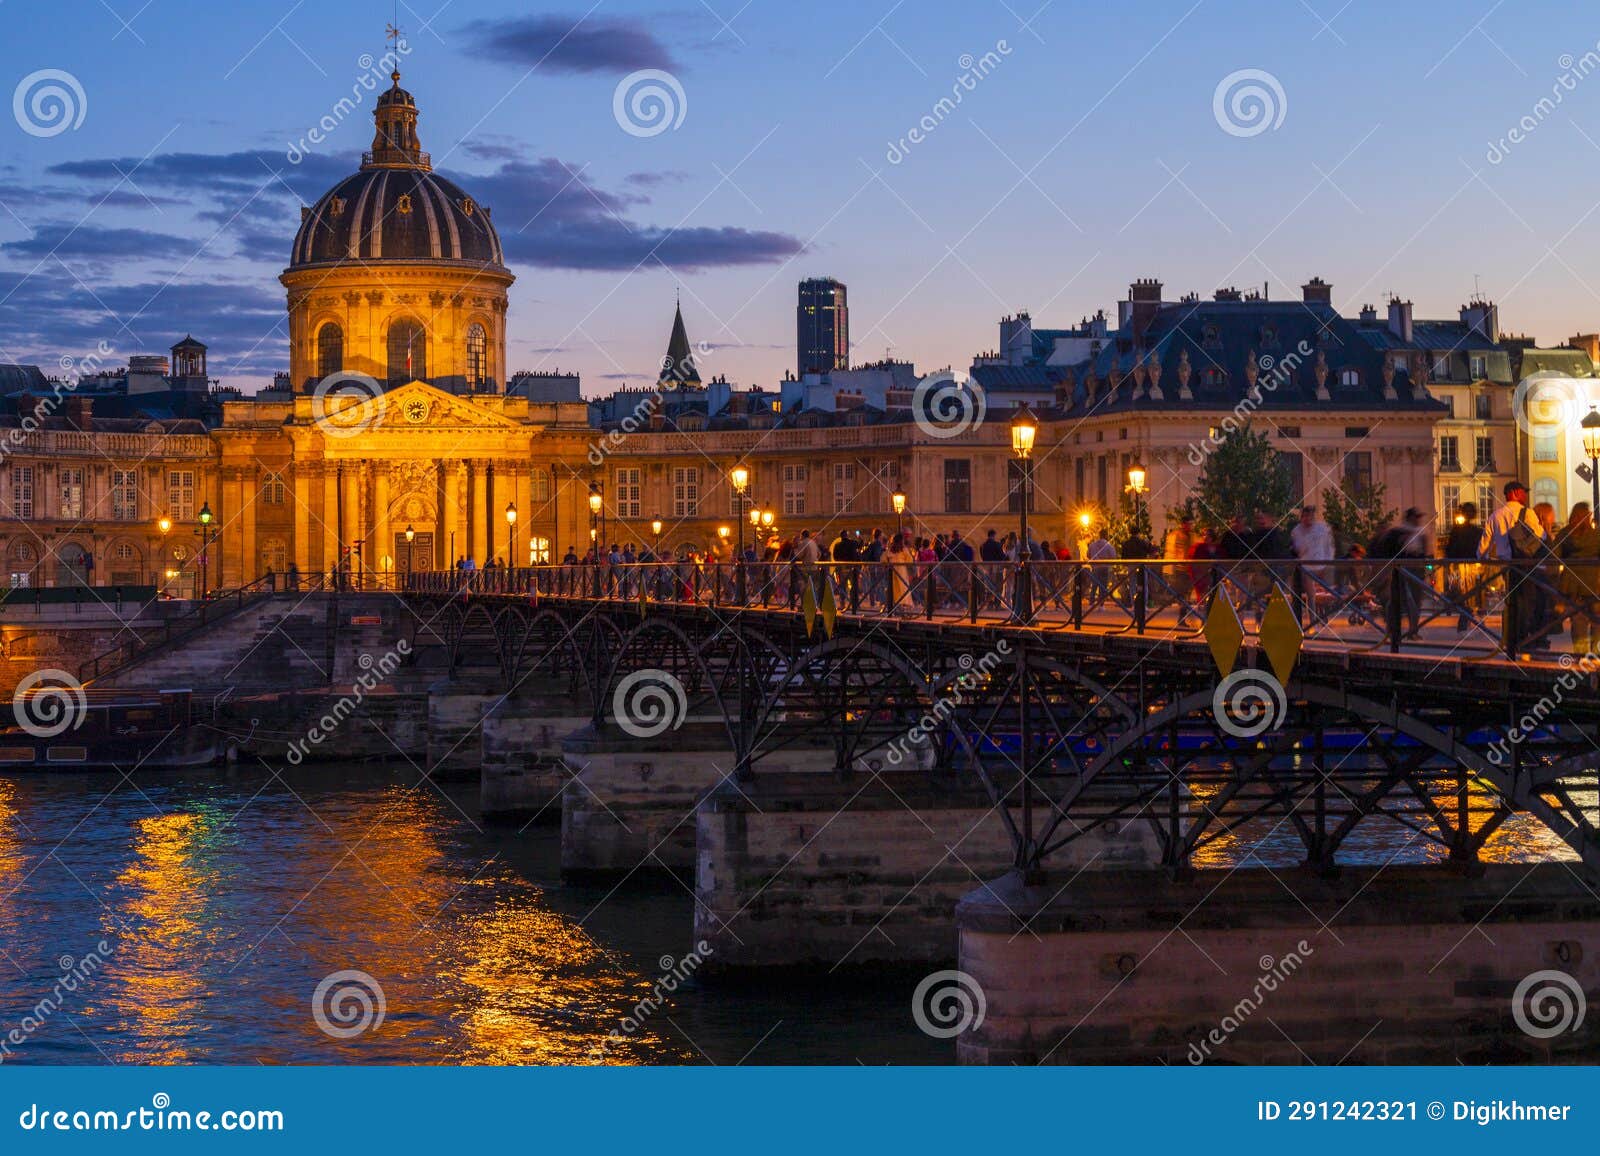 Le Pont Des Arts (in French) Bridge Over the Seine River at the